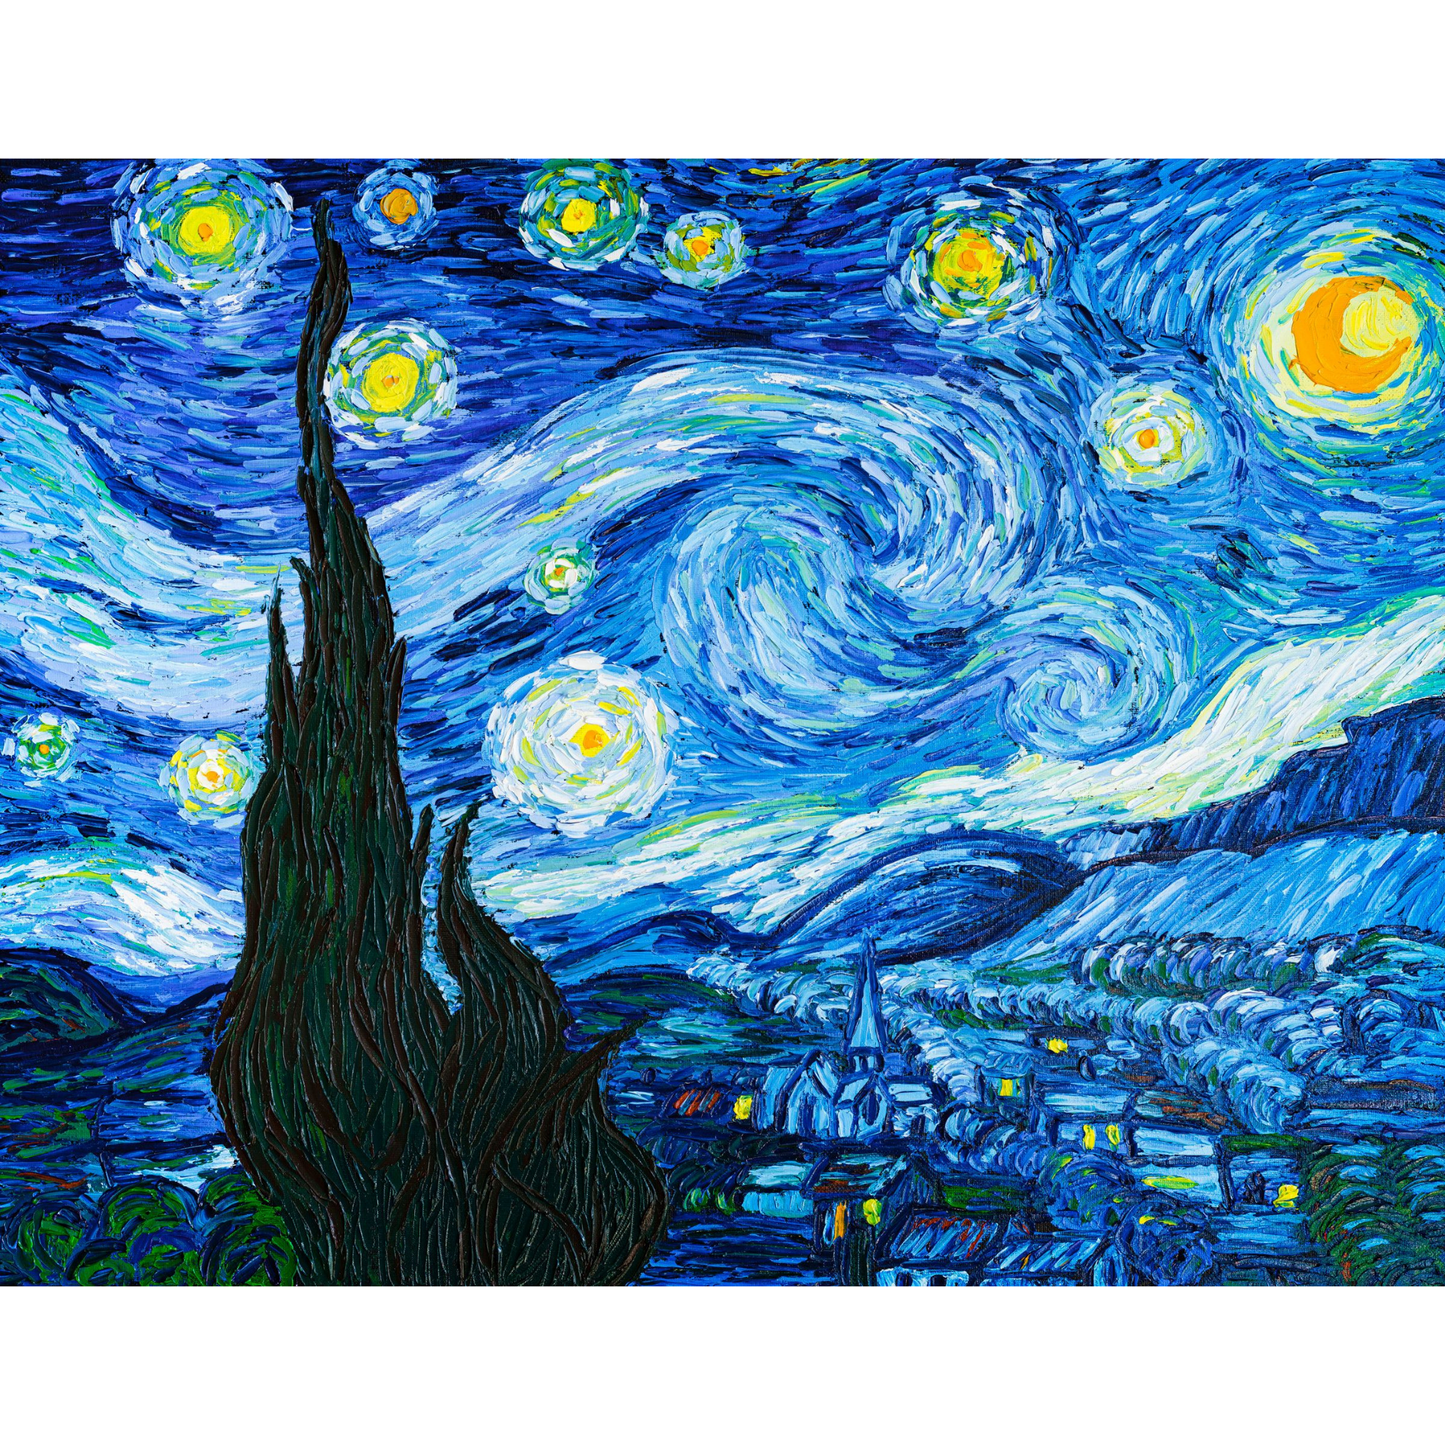 The Starry Night by Vincent Van Gogh. 11"x 17" print by Monahan Papers available at Milton's Daughter.